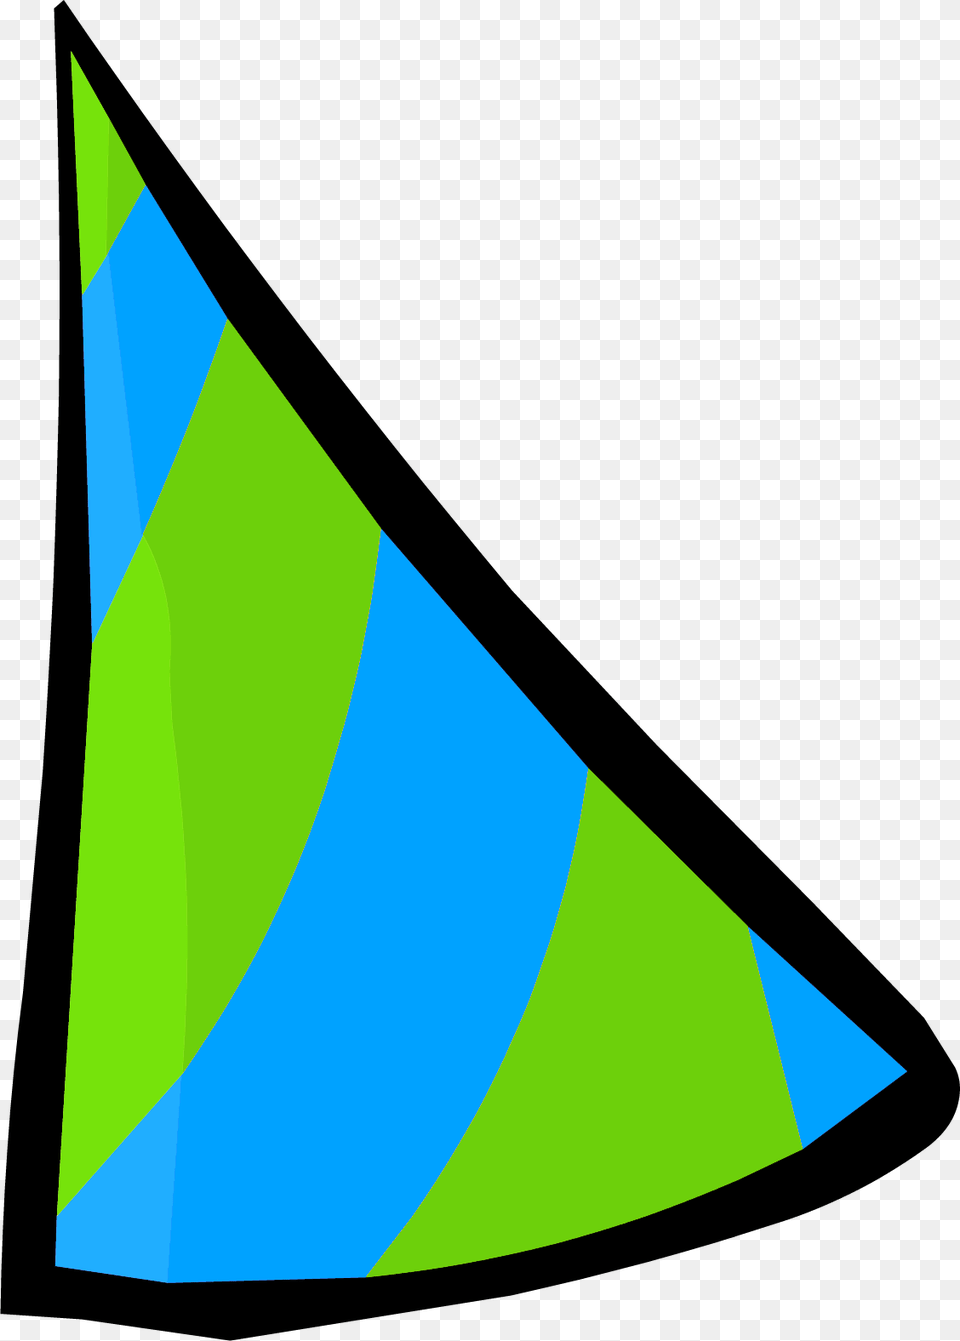 Cprg Wiki, Clothing, Hat, Triangle, Boat Png Image